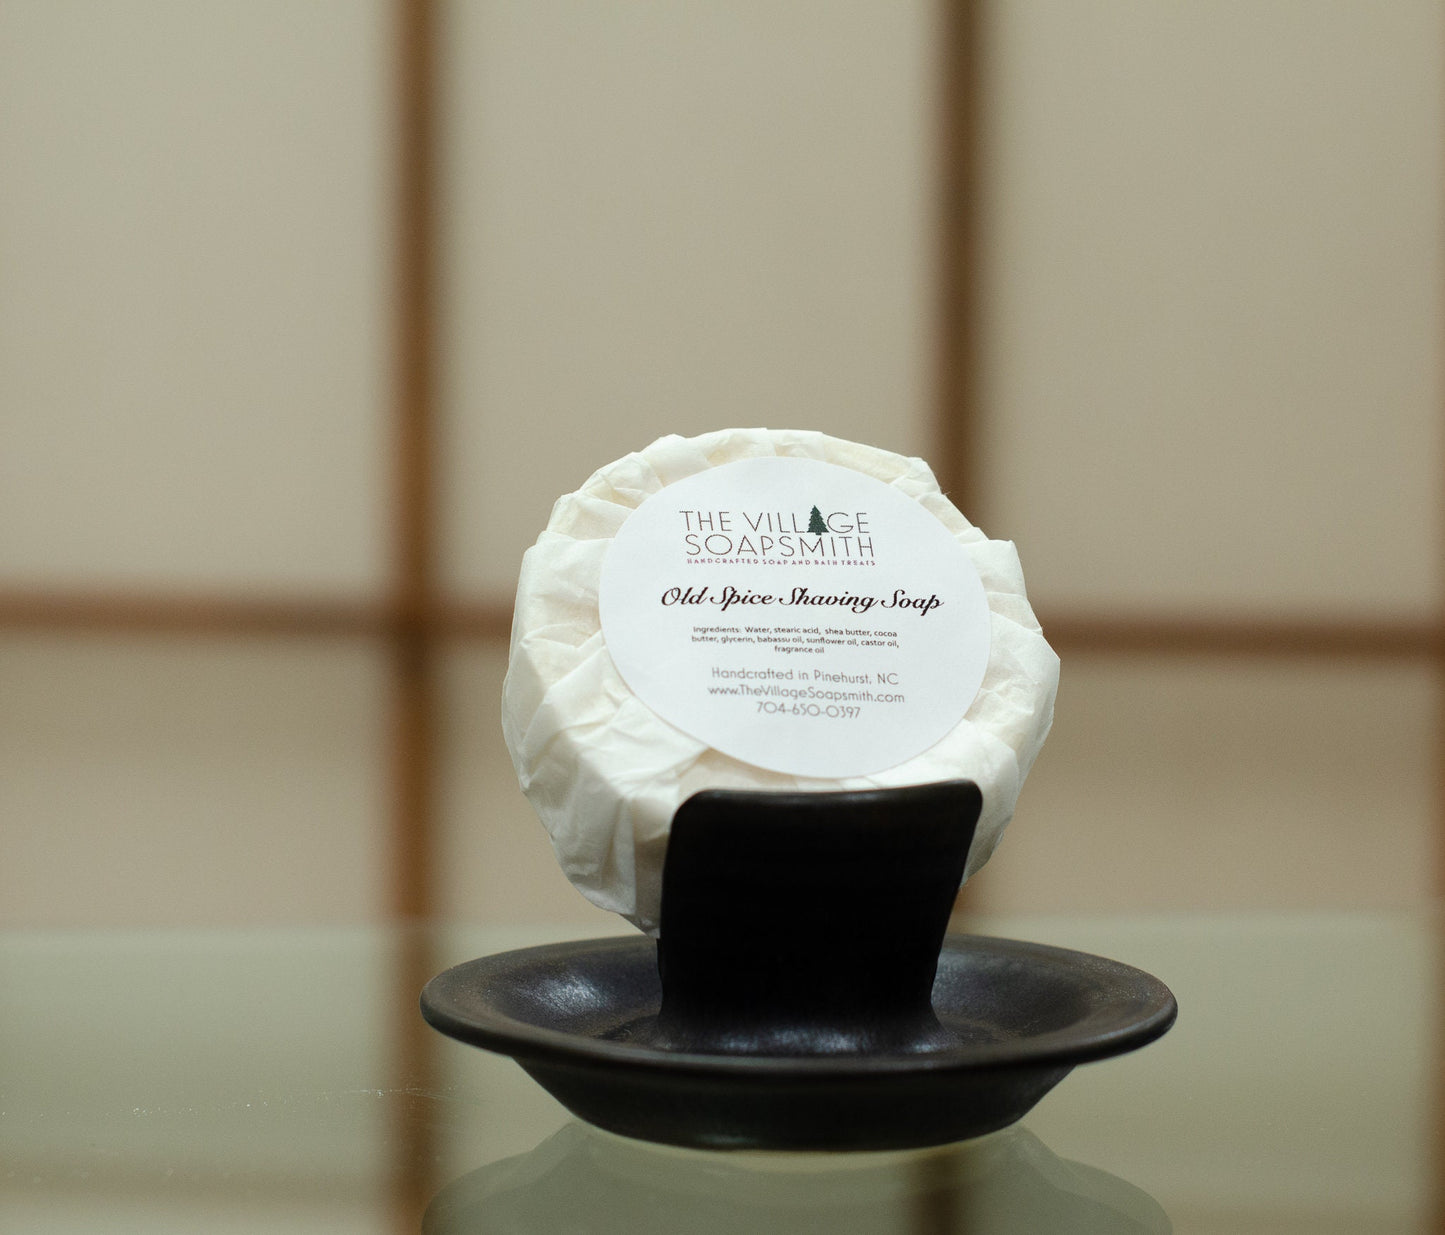 Old Spice (type) Shaving Soap - Shave Soap - Mens Shaving Soap - Gift for Him - Wet Shaving - Shave Puck - Natural Shave